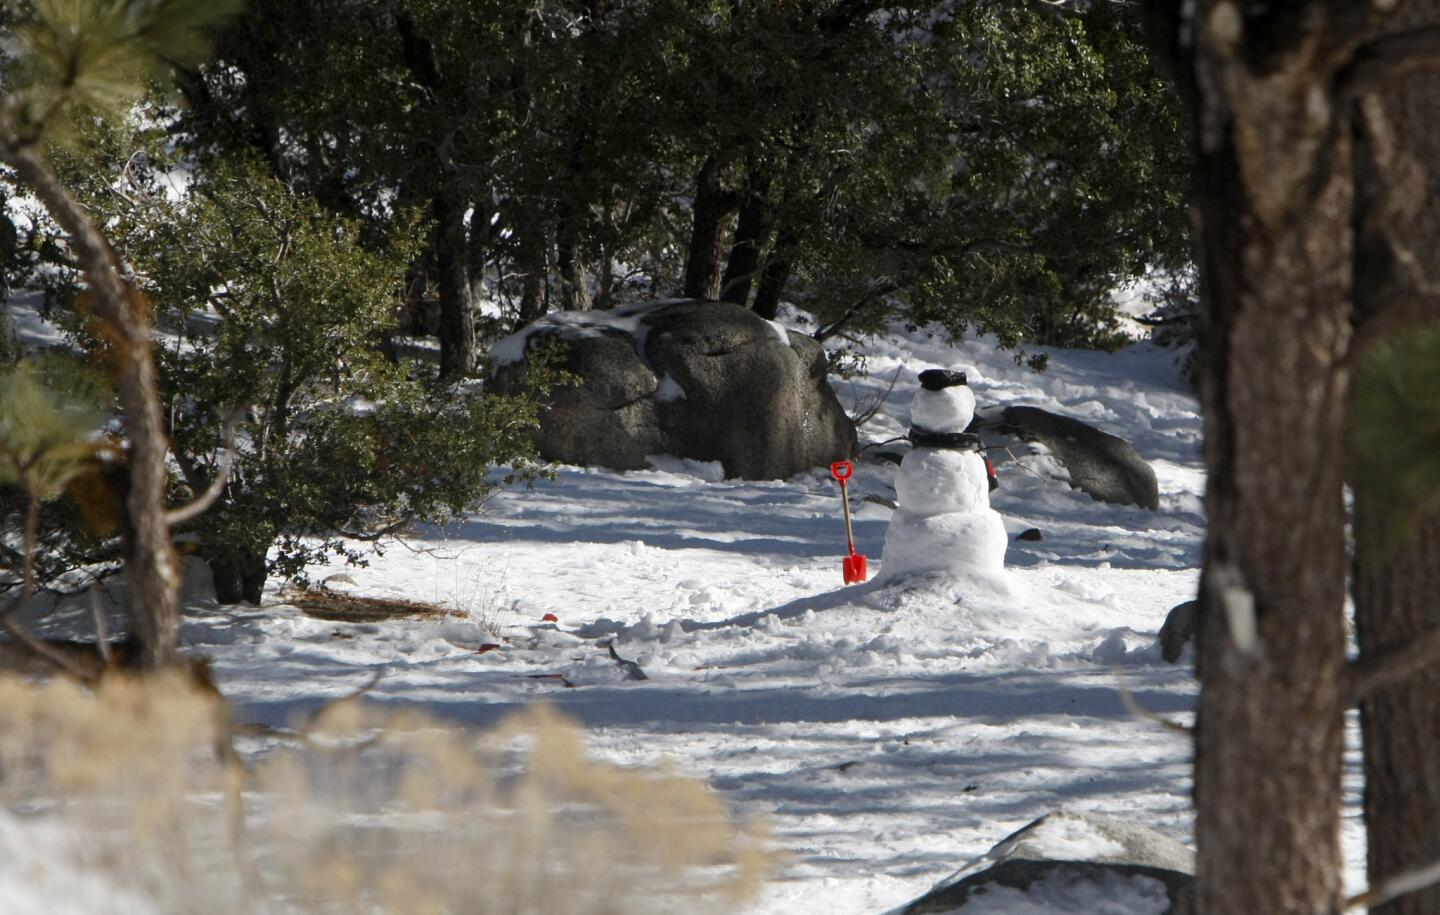 Photo Gallery: Families take advantage of first winter snow that remains in the forest above La Cañada Flintridge in the Angeles National Forest of the San Gabriel Mountains